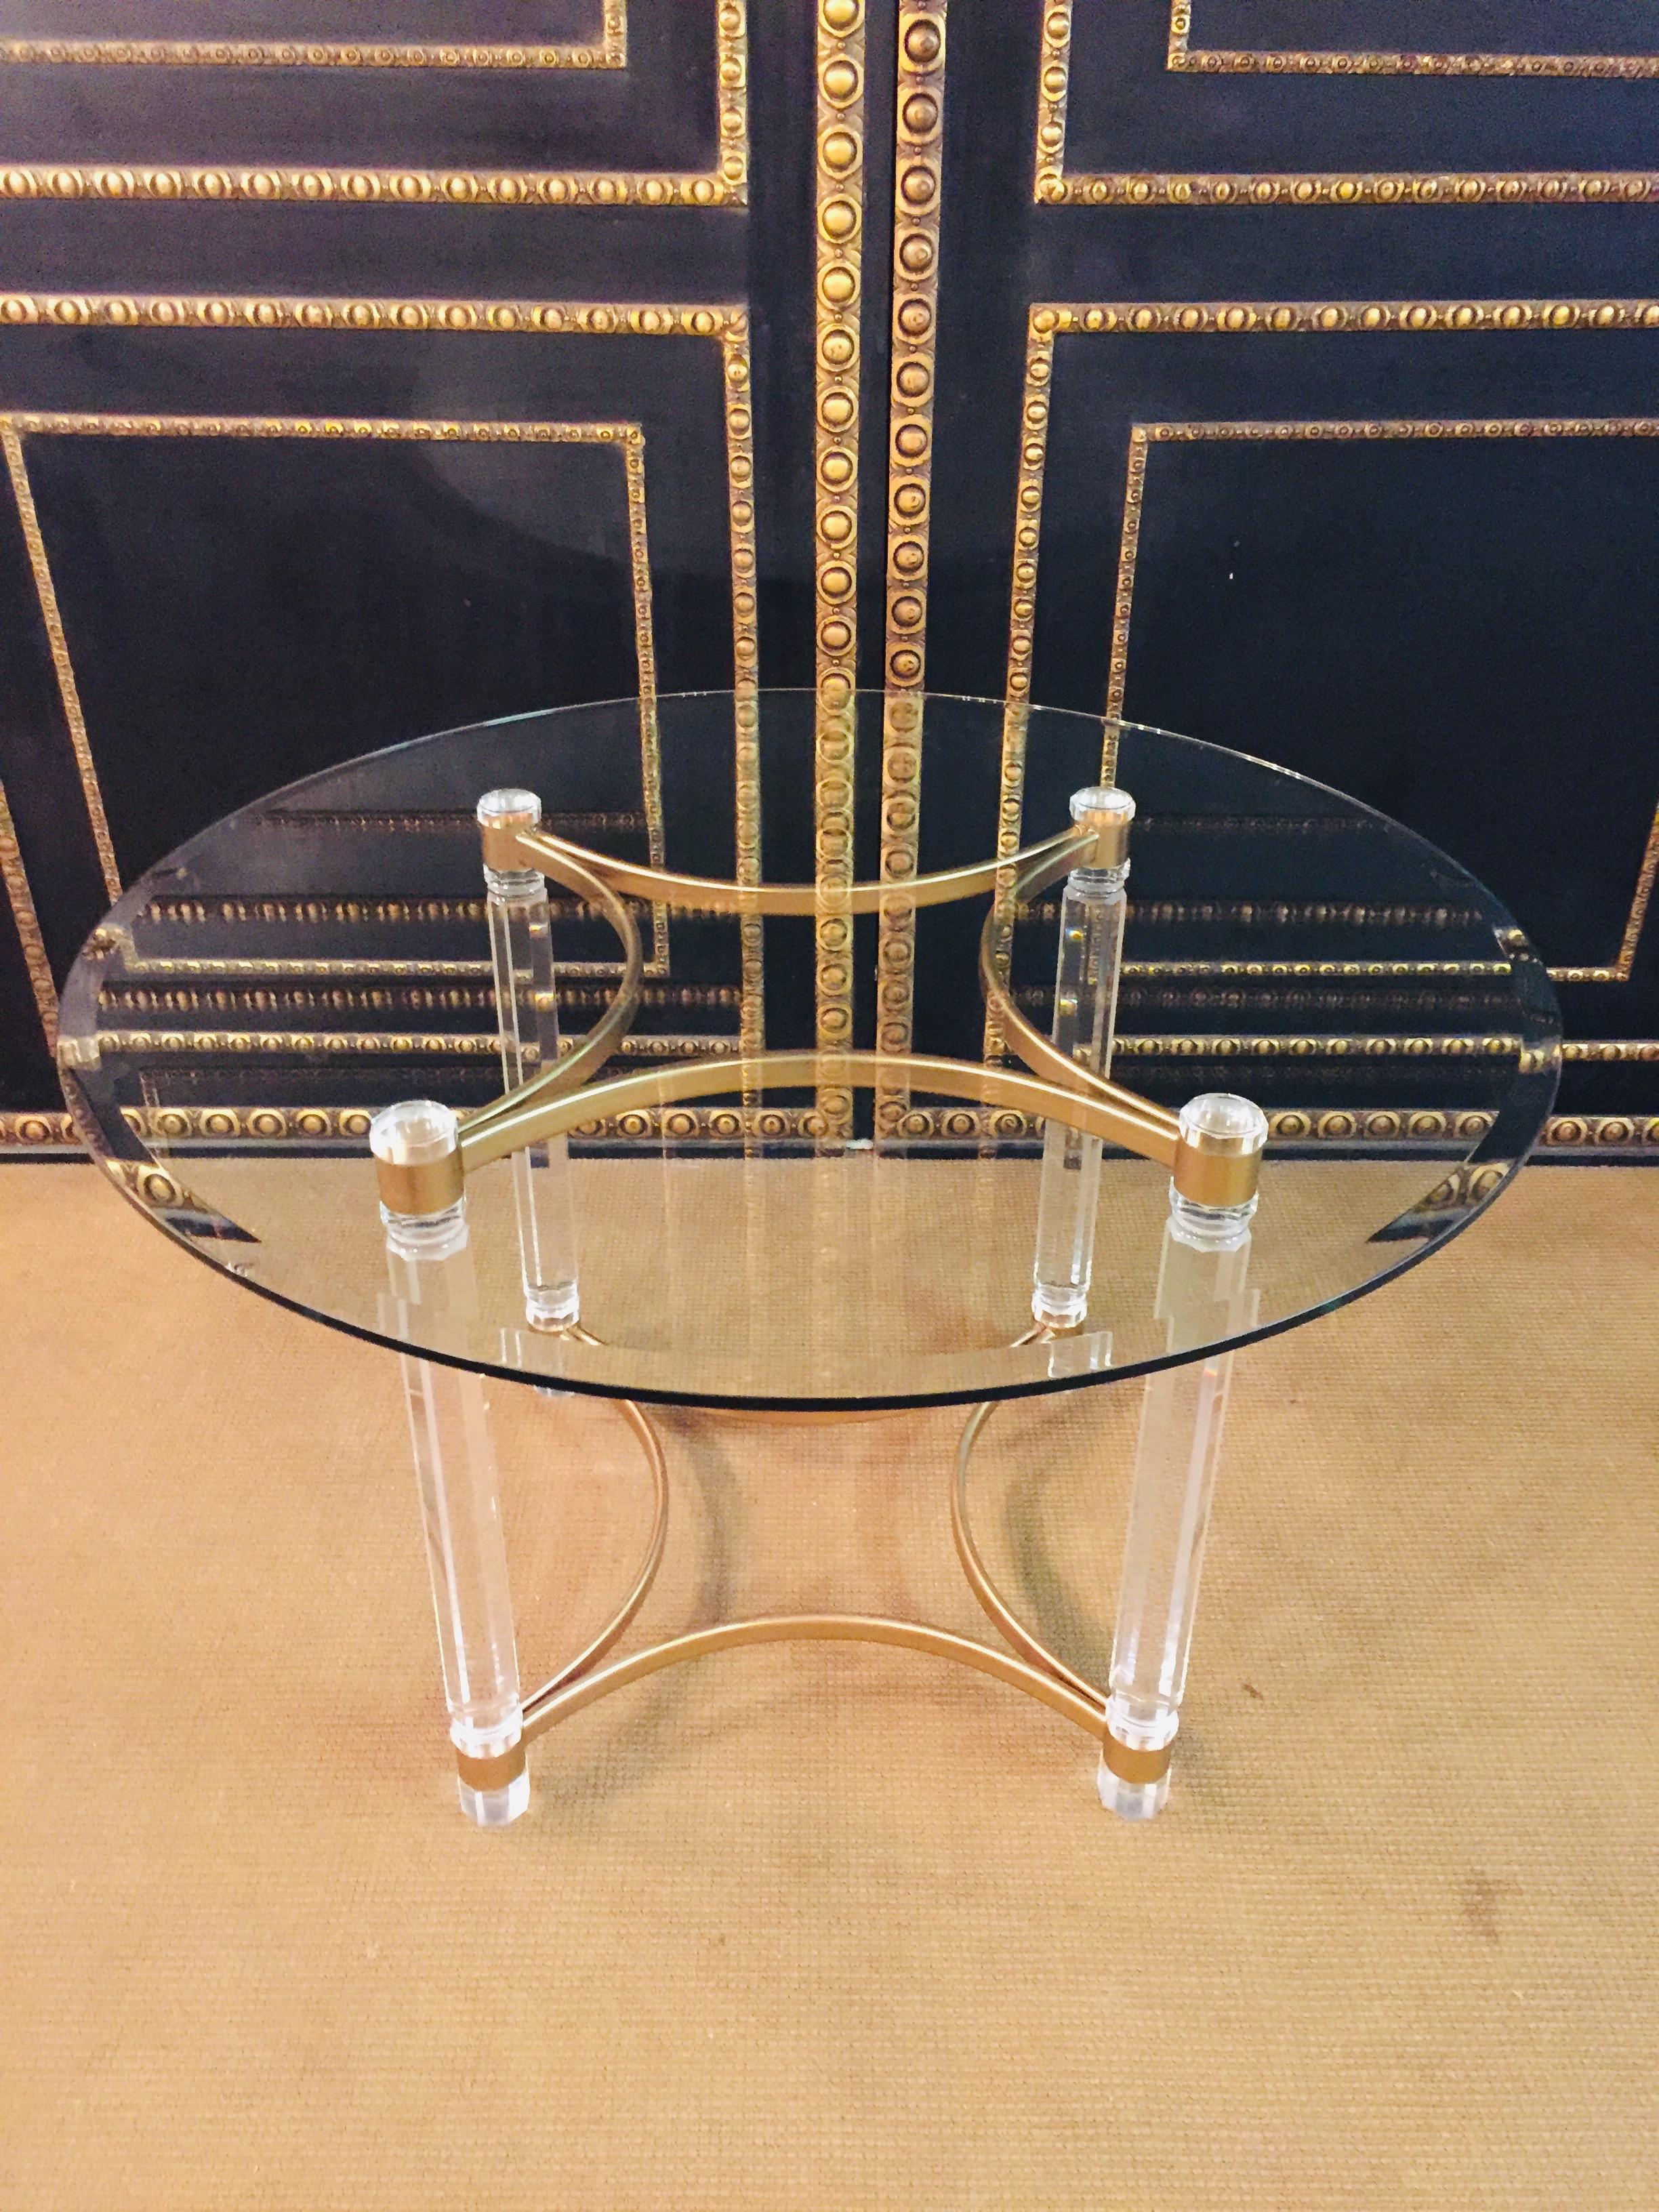 Modern Acrylic Dining Table with Four Collumns Legs and Round Glass Plate